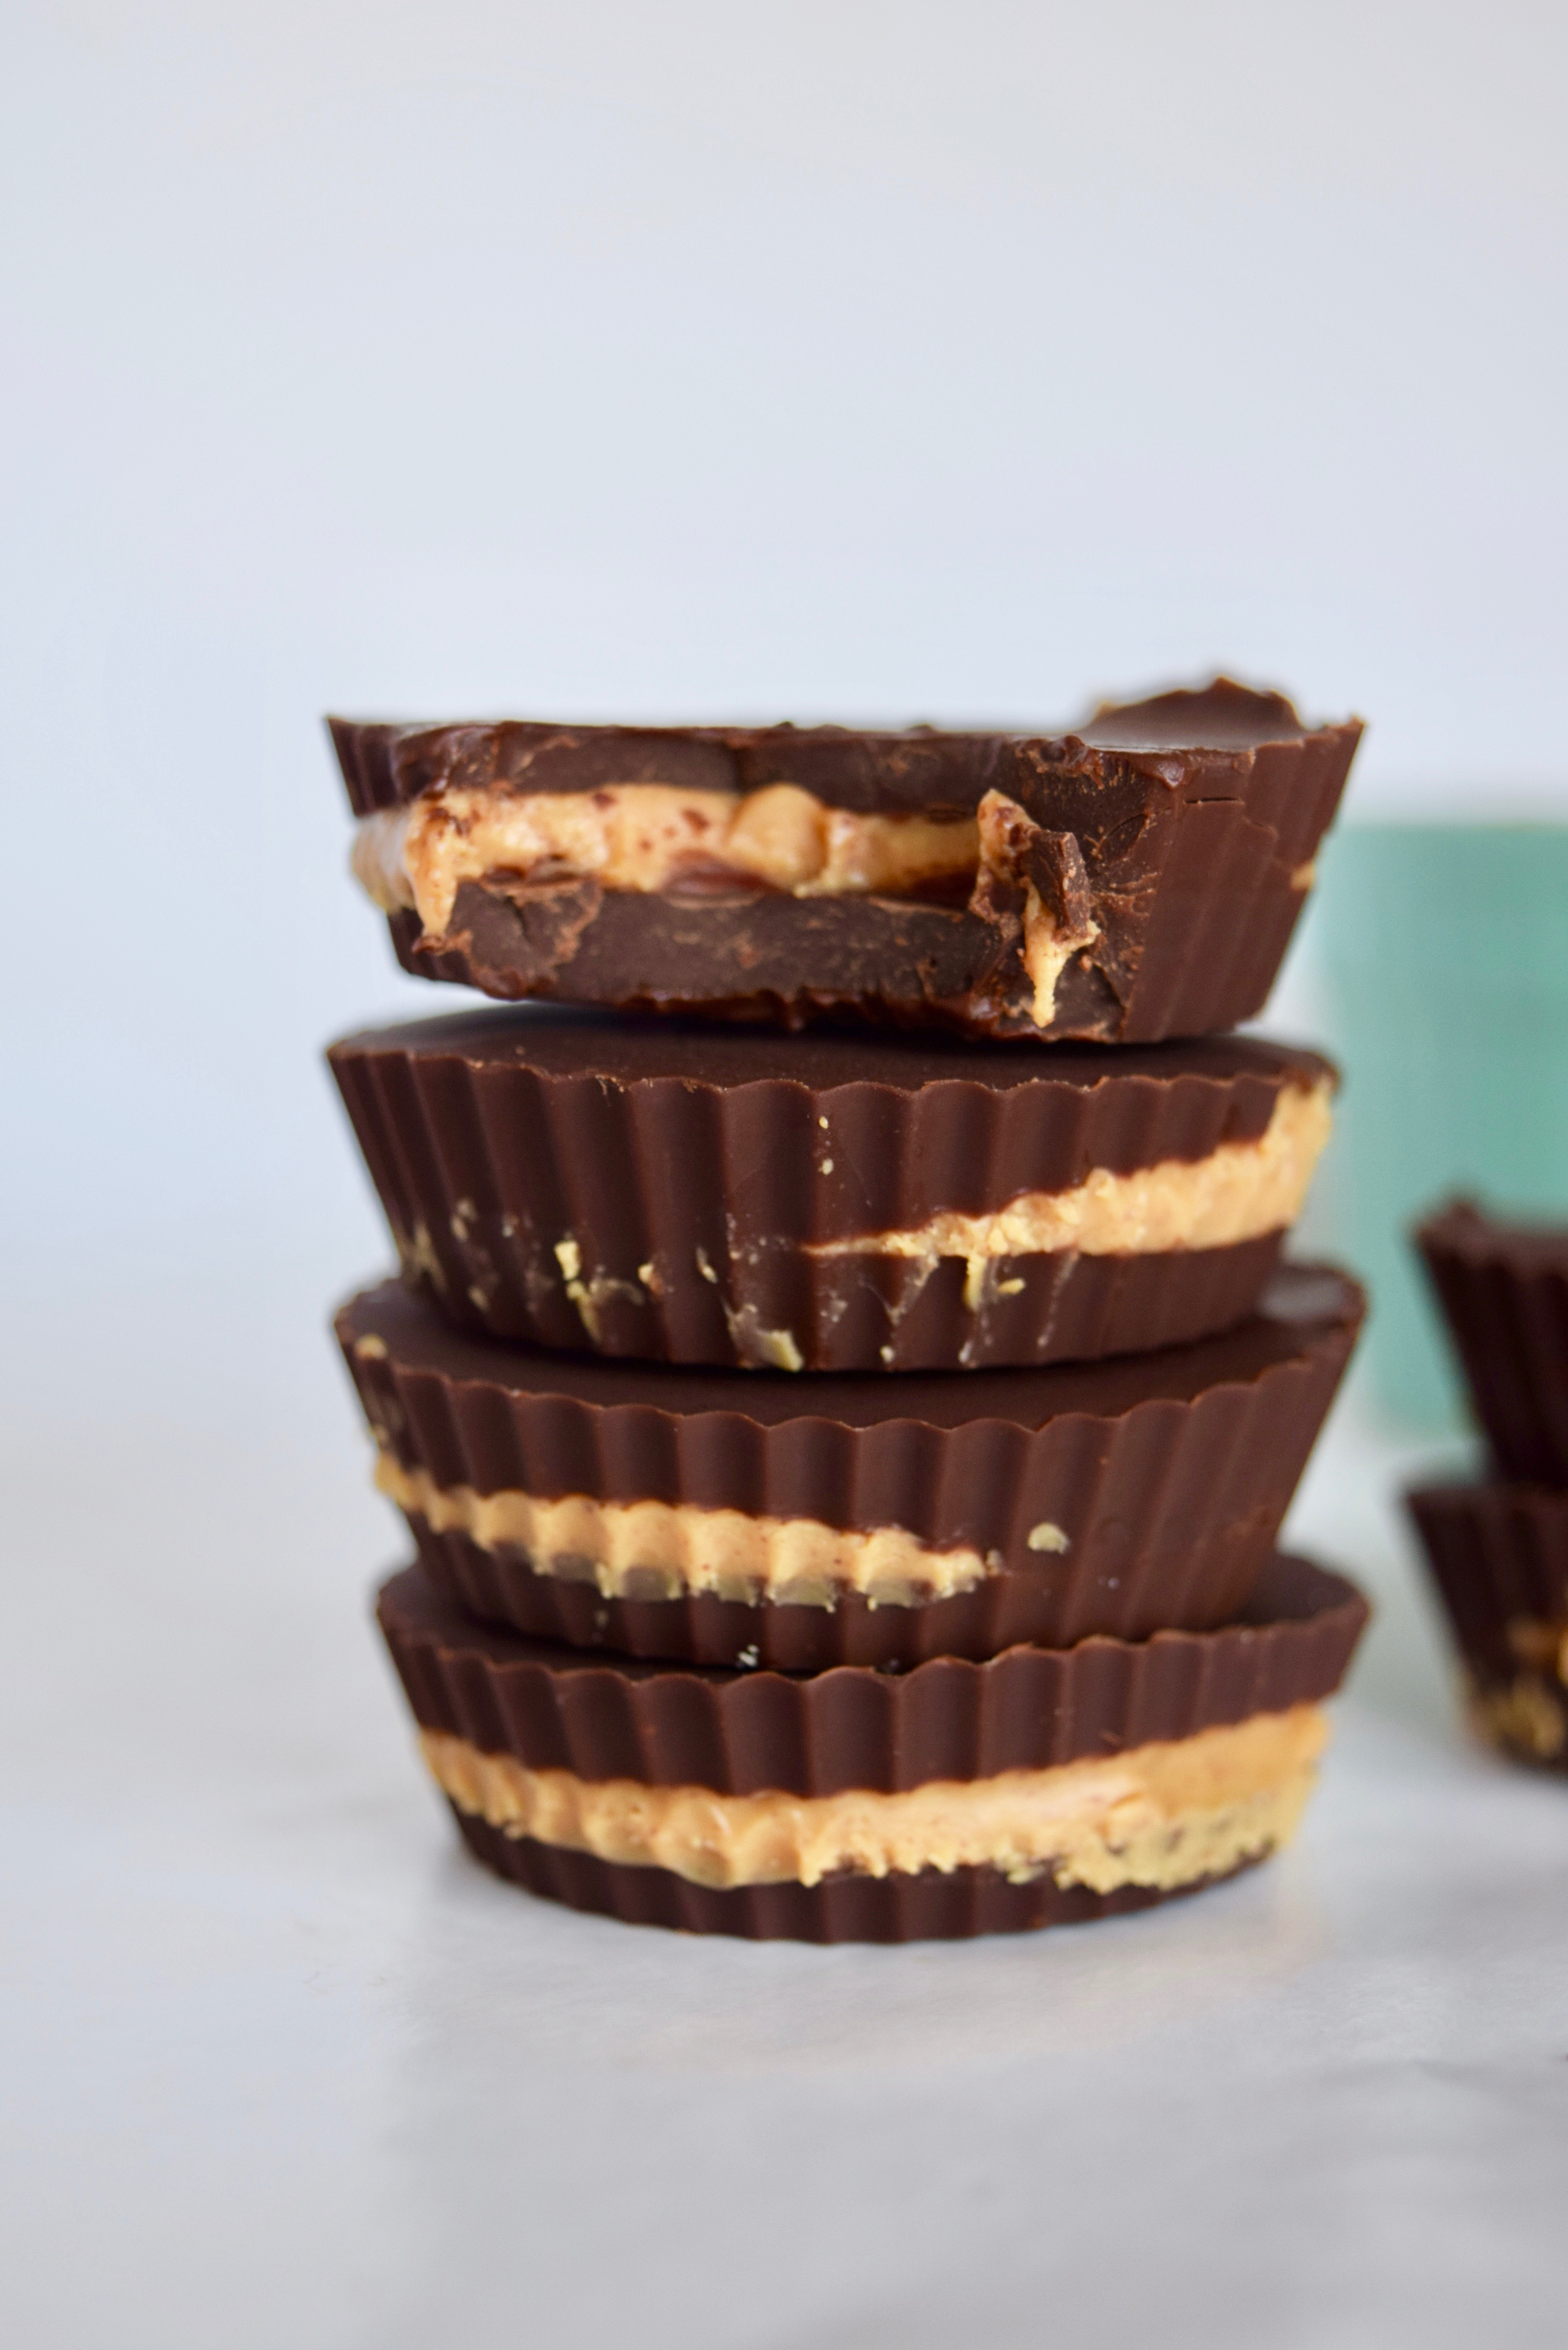 How To Make Dark Chocolate Peanut Butter Cups